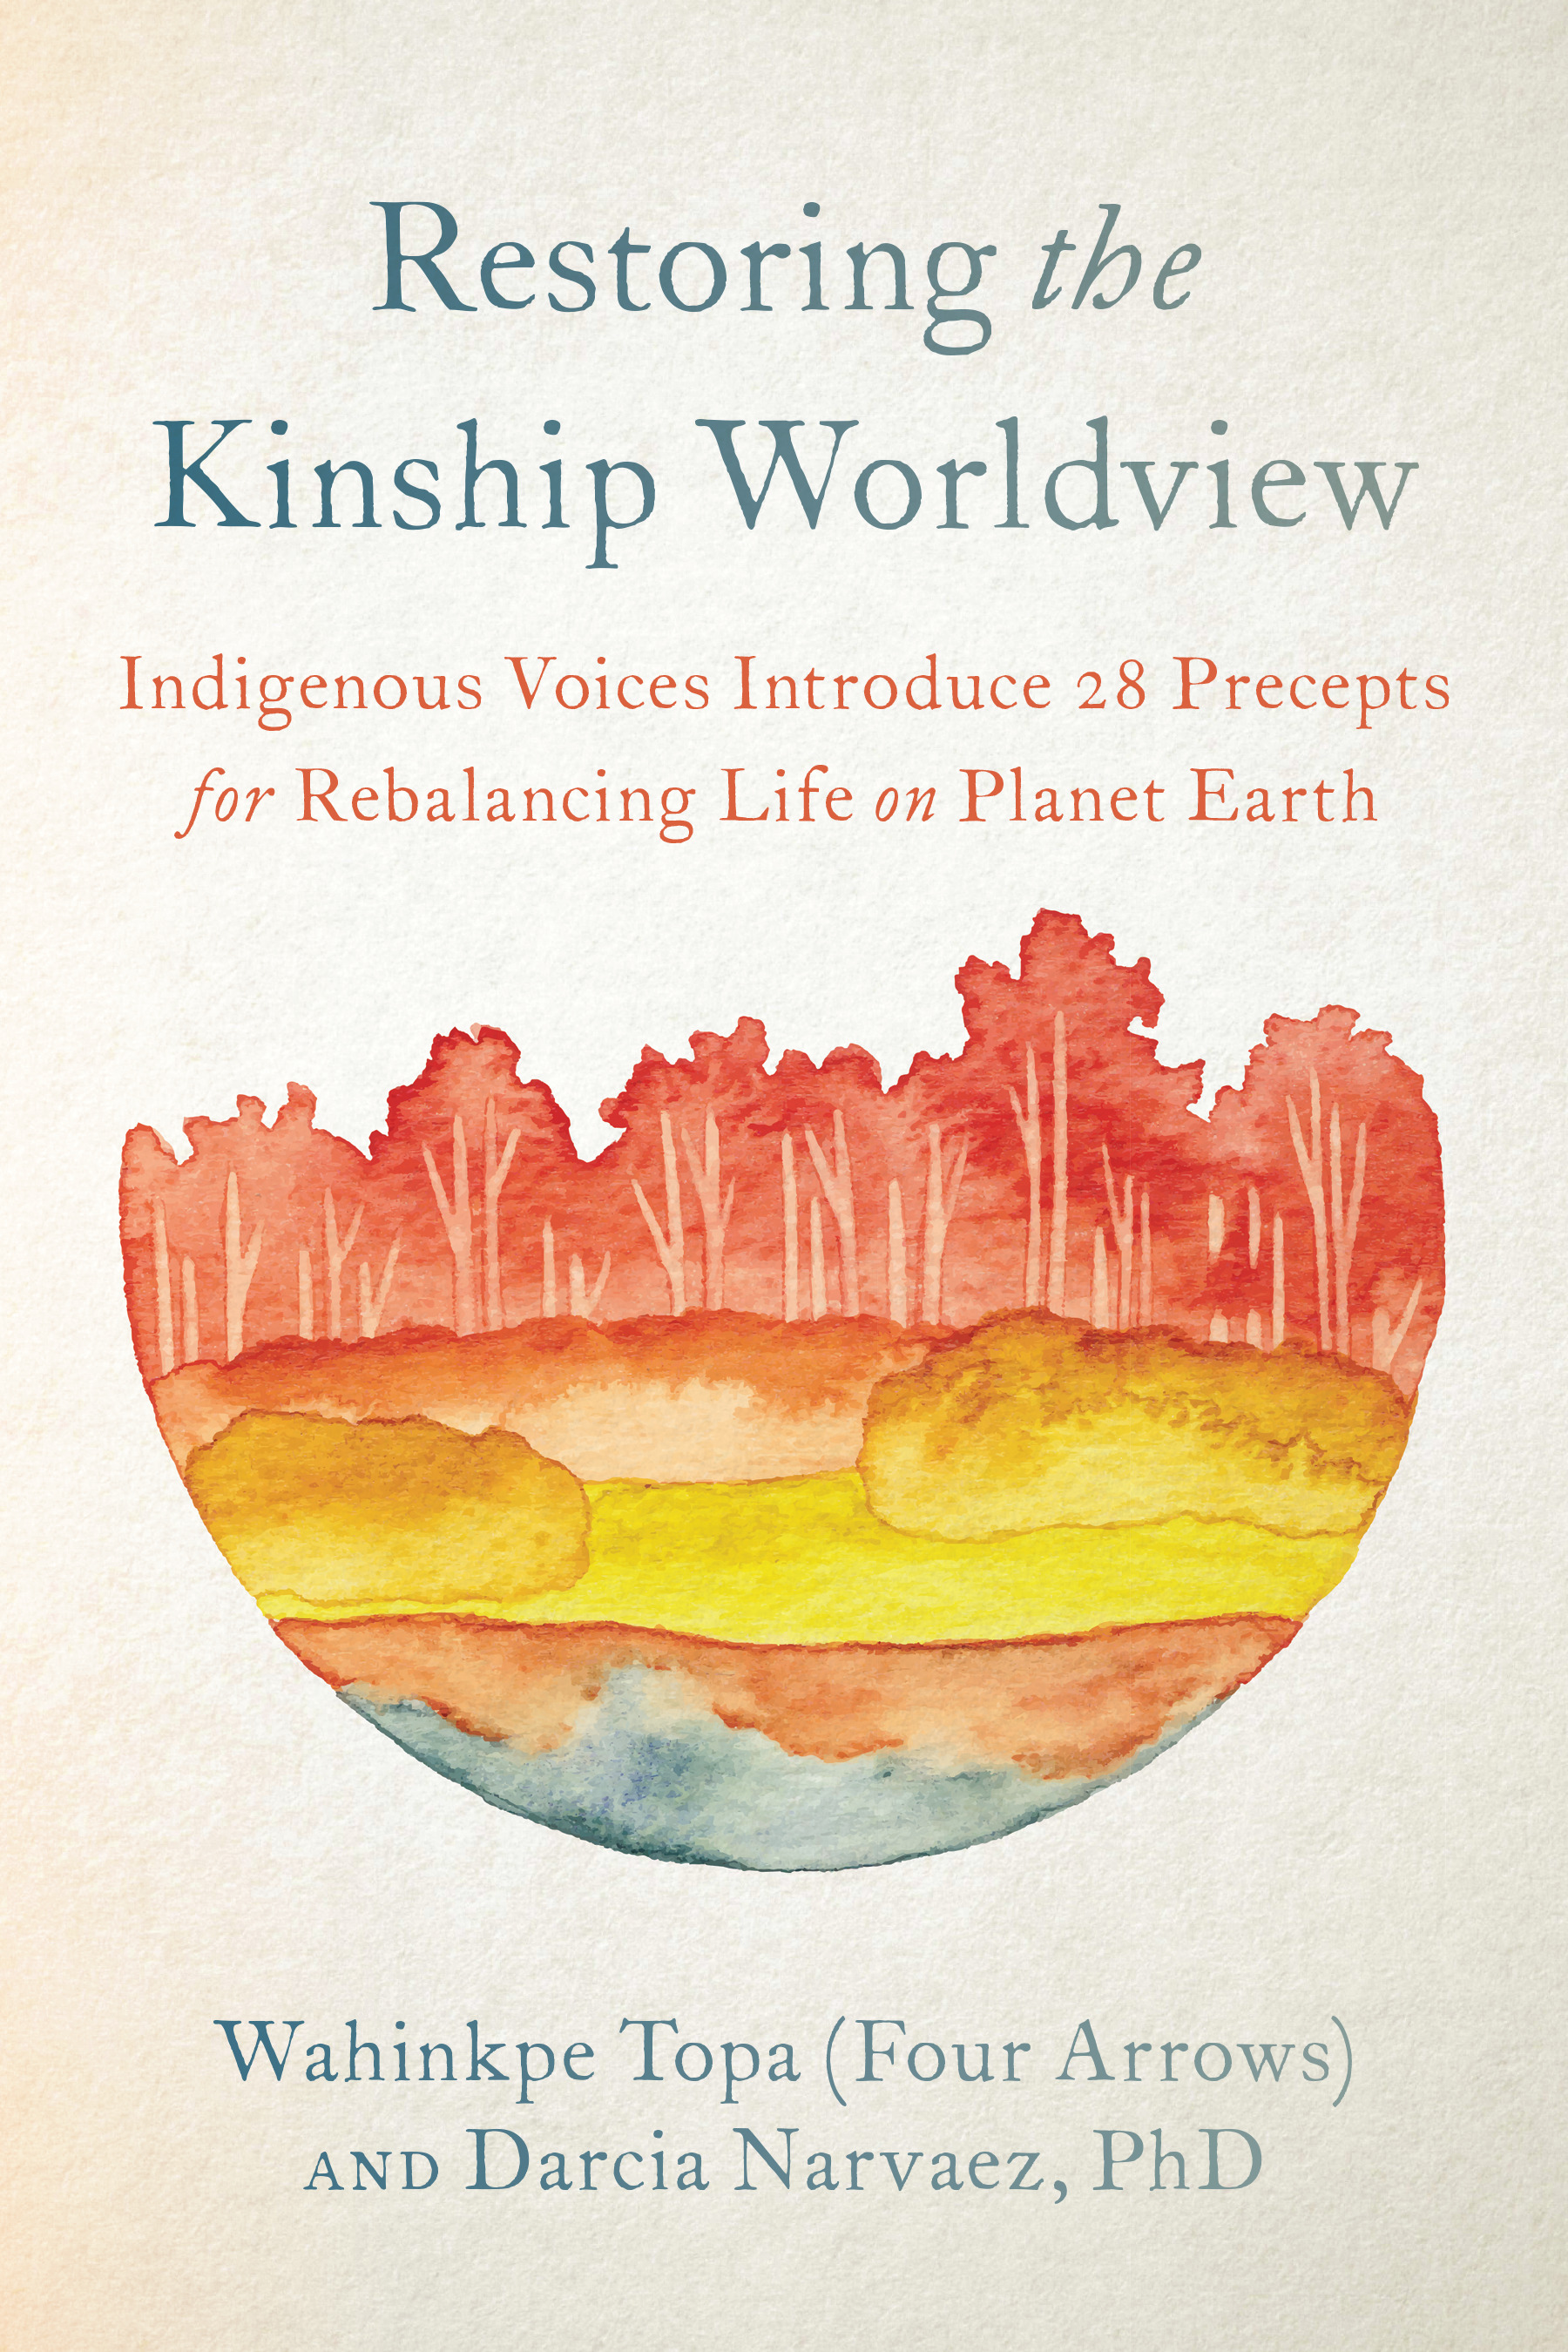 Restoring the Kinship Worldview : Indigenous Voices Introduce 28 Precepts for Rebalancing Life on Planet Earth | Topa (Four Arrows), Wahinkpe (Auteur) | Narvaez, Darcia (Auteur)